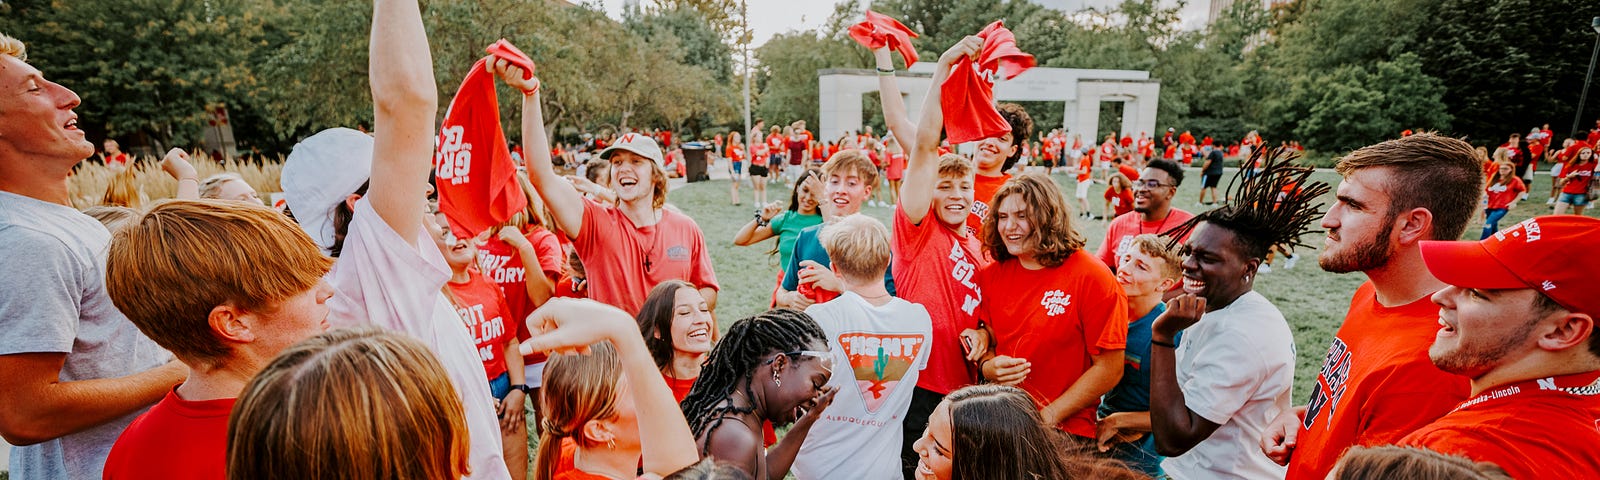 A group of students dance at the Chancellor’s BBQ to welcome the class of 2026 in the greenspace by the Nebraska Union